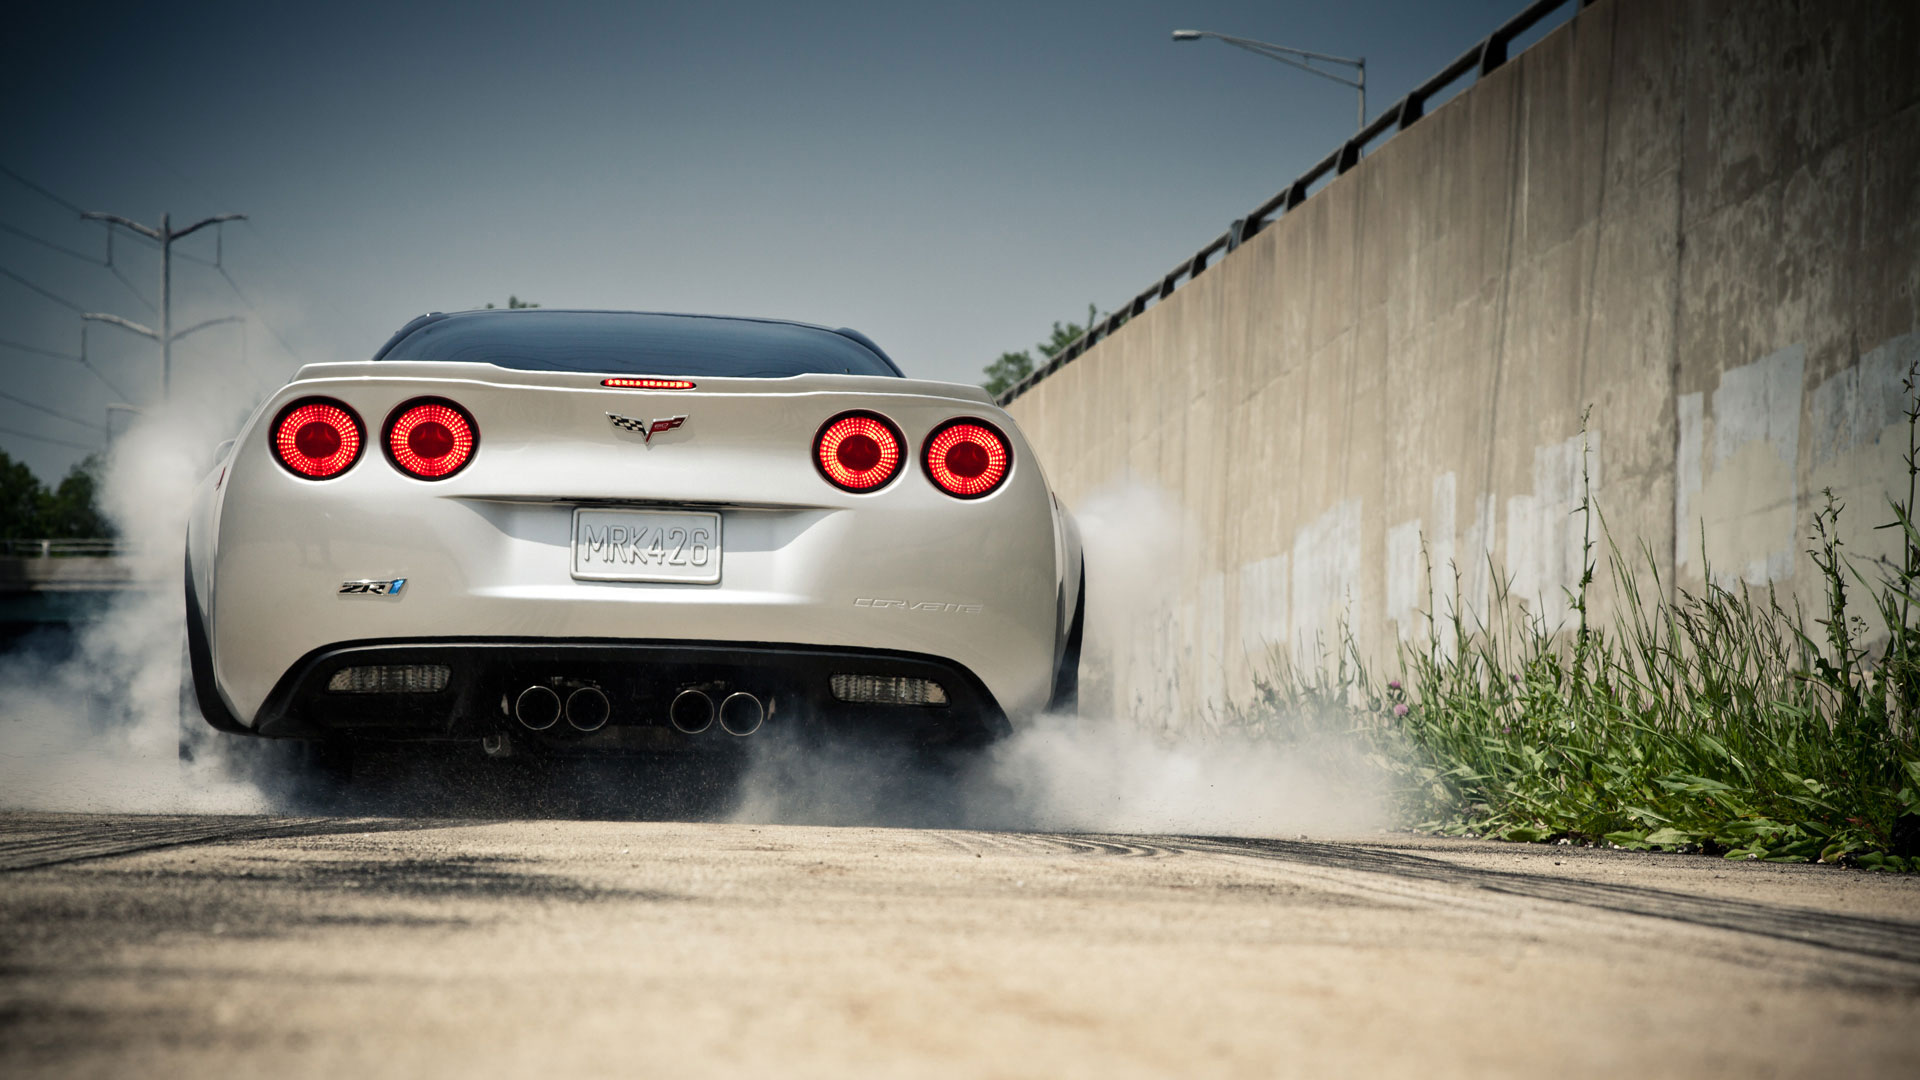 Week S Wallpaper Wednesday We Get Up Close And Personal With A C6